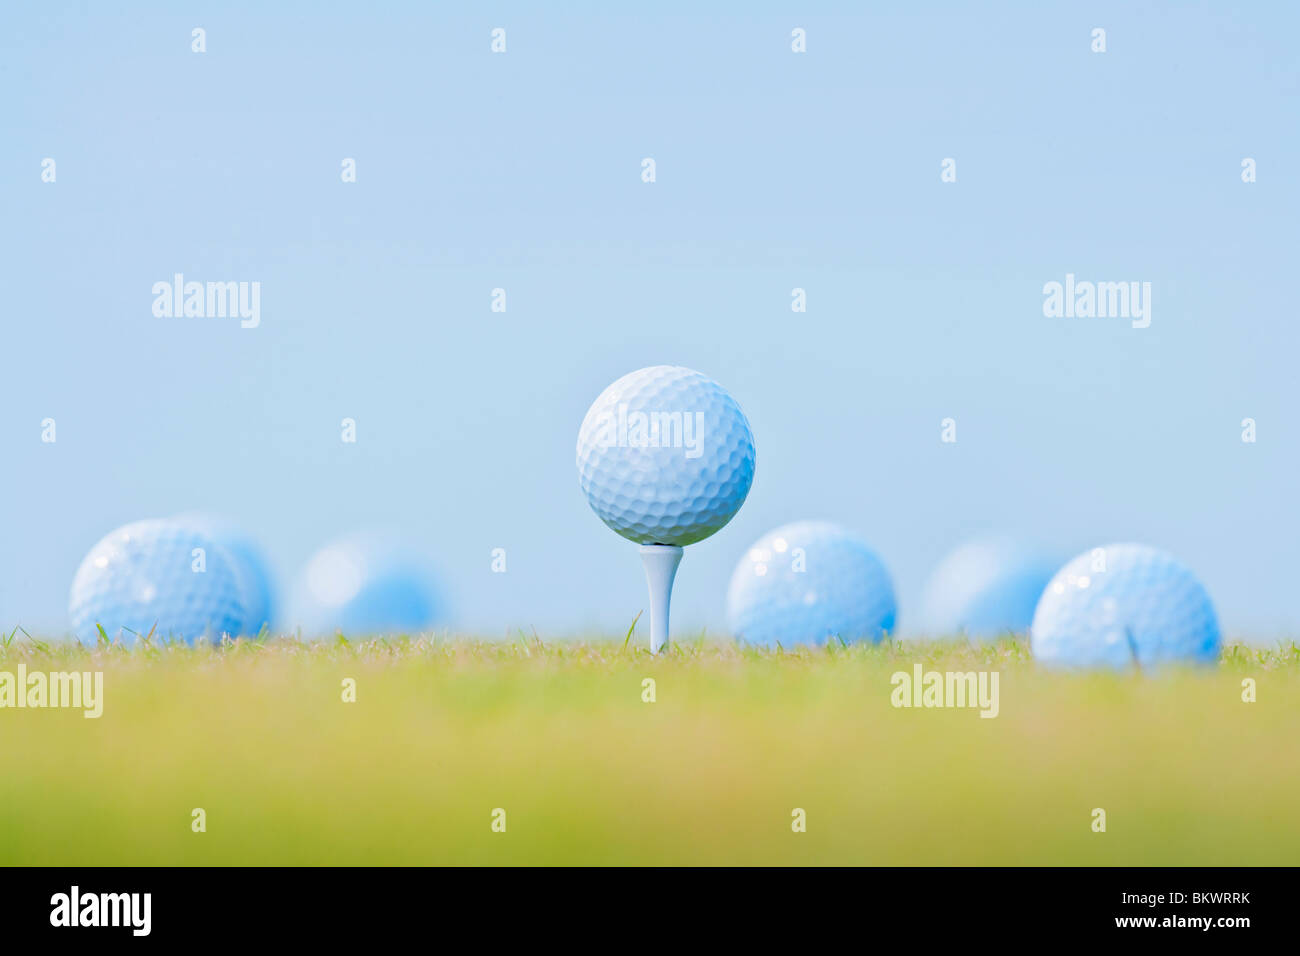 golf ball on tee surrounded by other golf balls out of focus Stock Photo